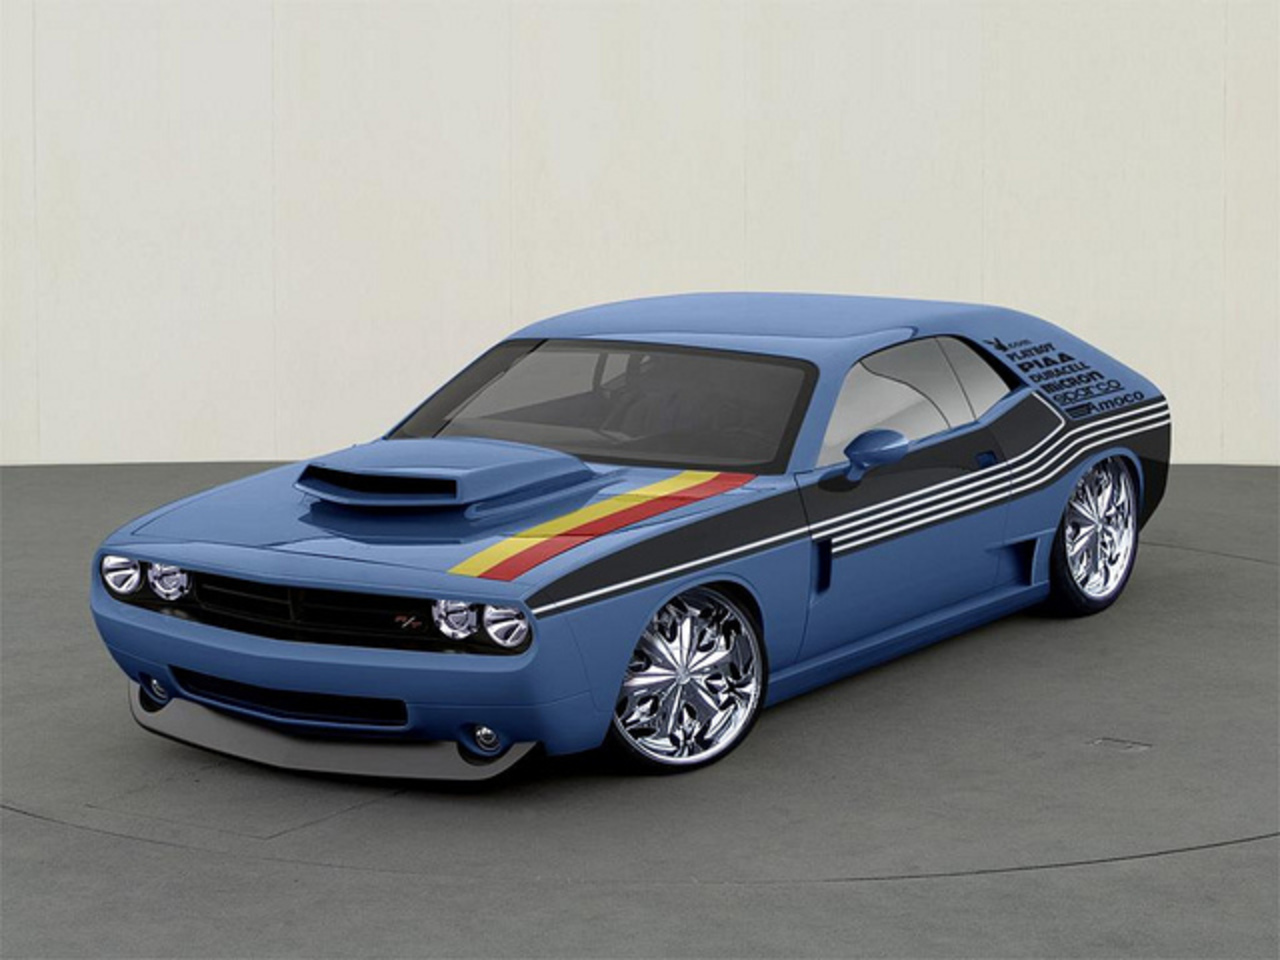 Dodge Challenger Coupe | Flickr - Photo Sharing!